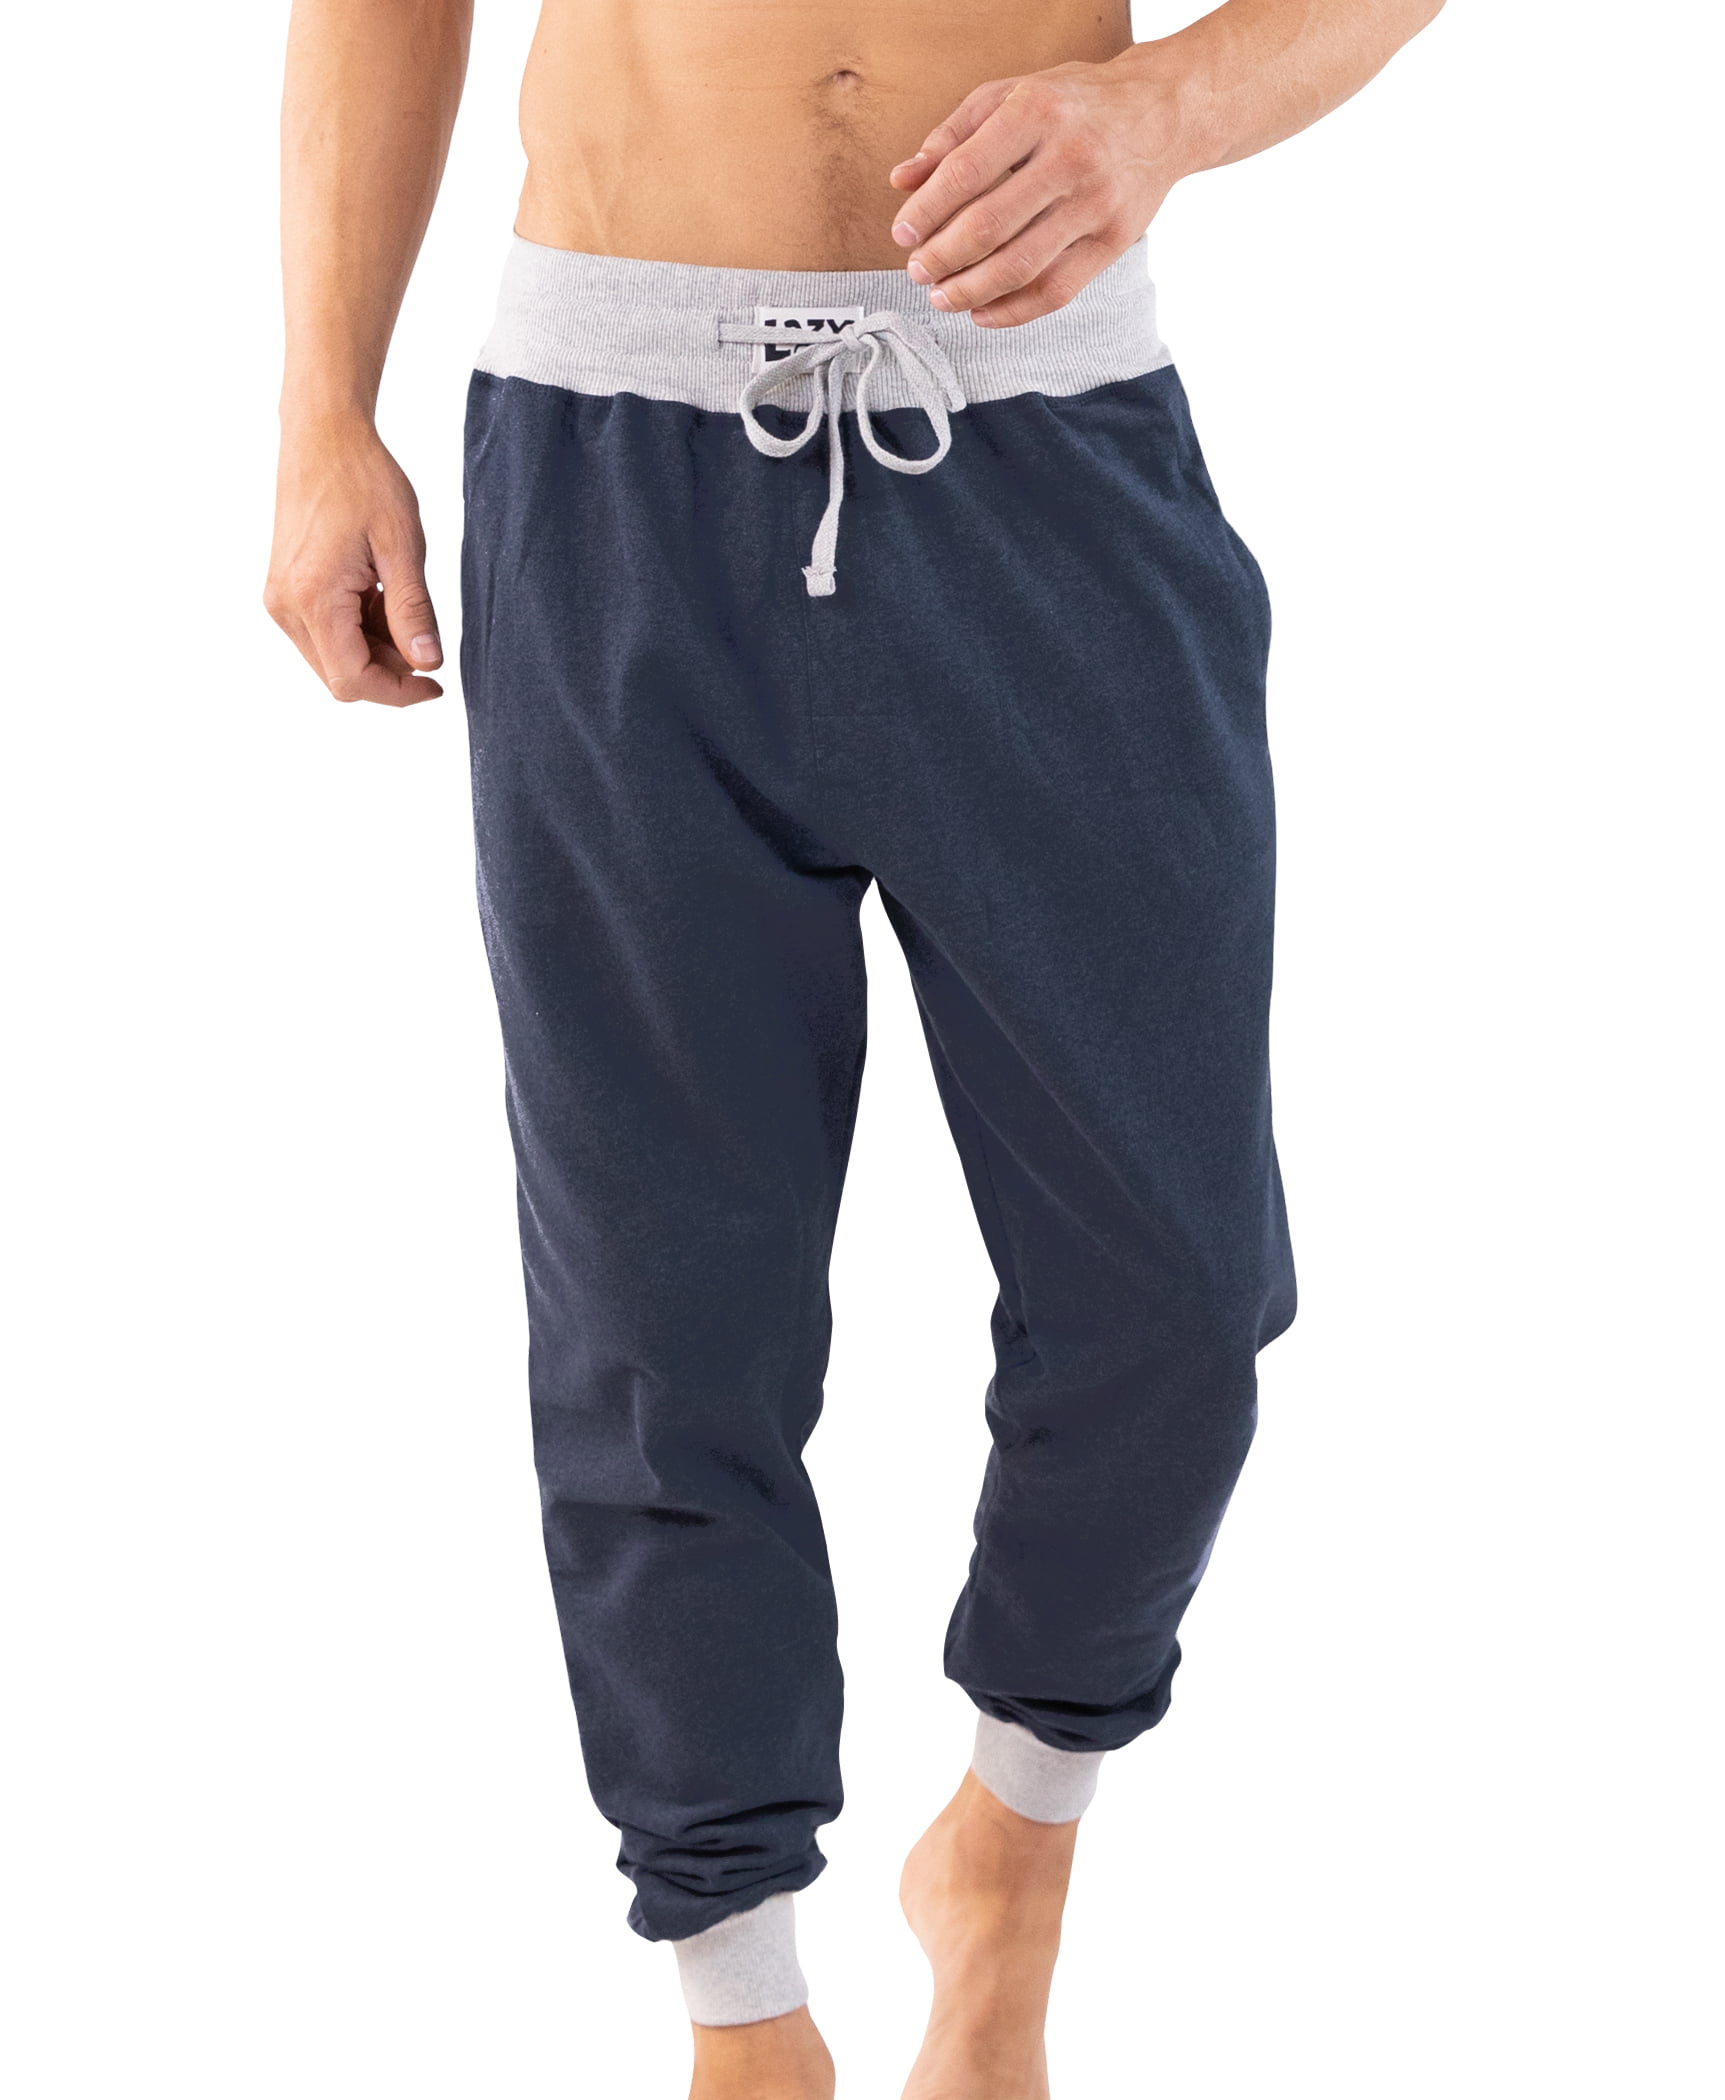  Lazy One Men's Jogger Sweatpants, Cozy, Warm, Pockets, Bigfoot,  Mythical (X-Small) : Clothing, Shoes & Jewelry